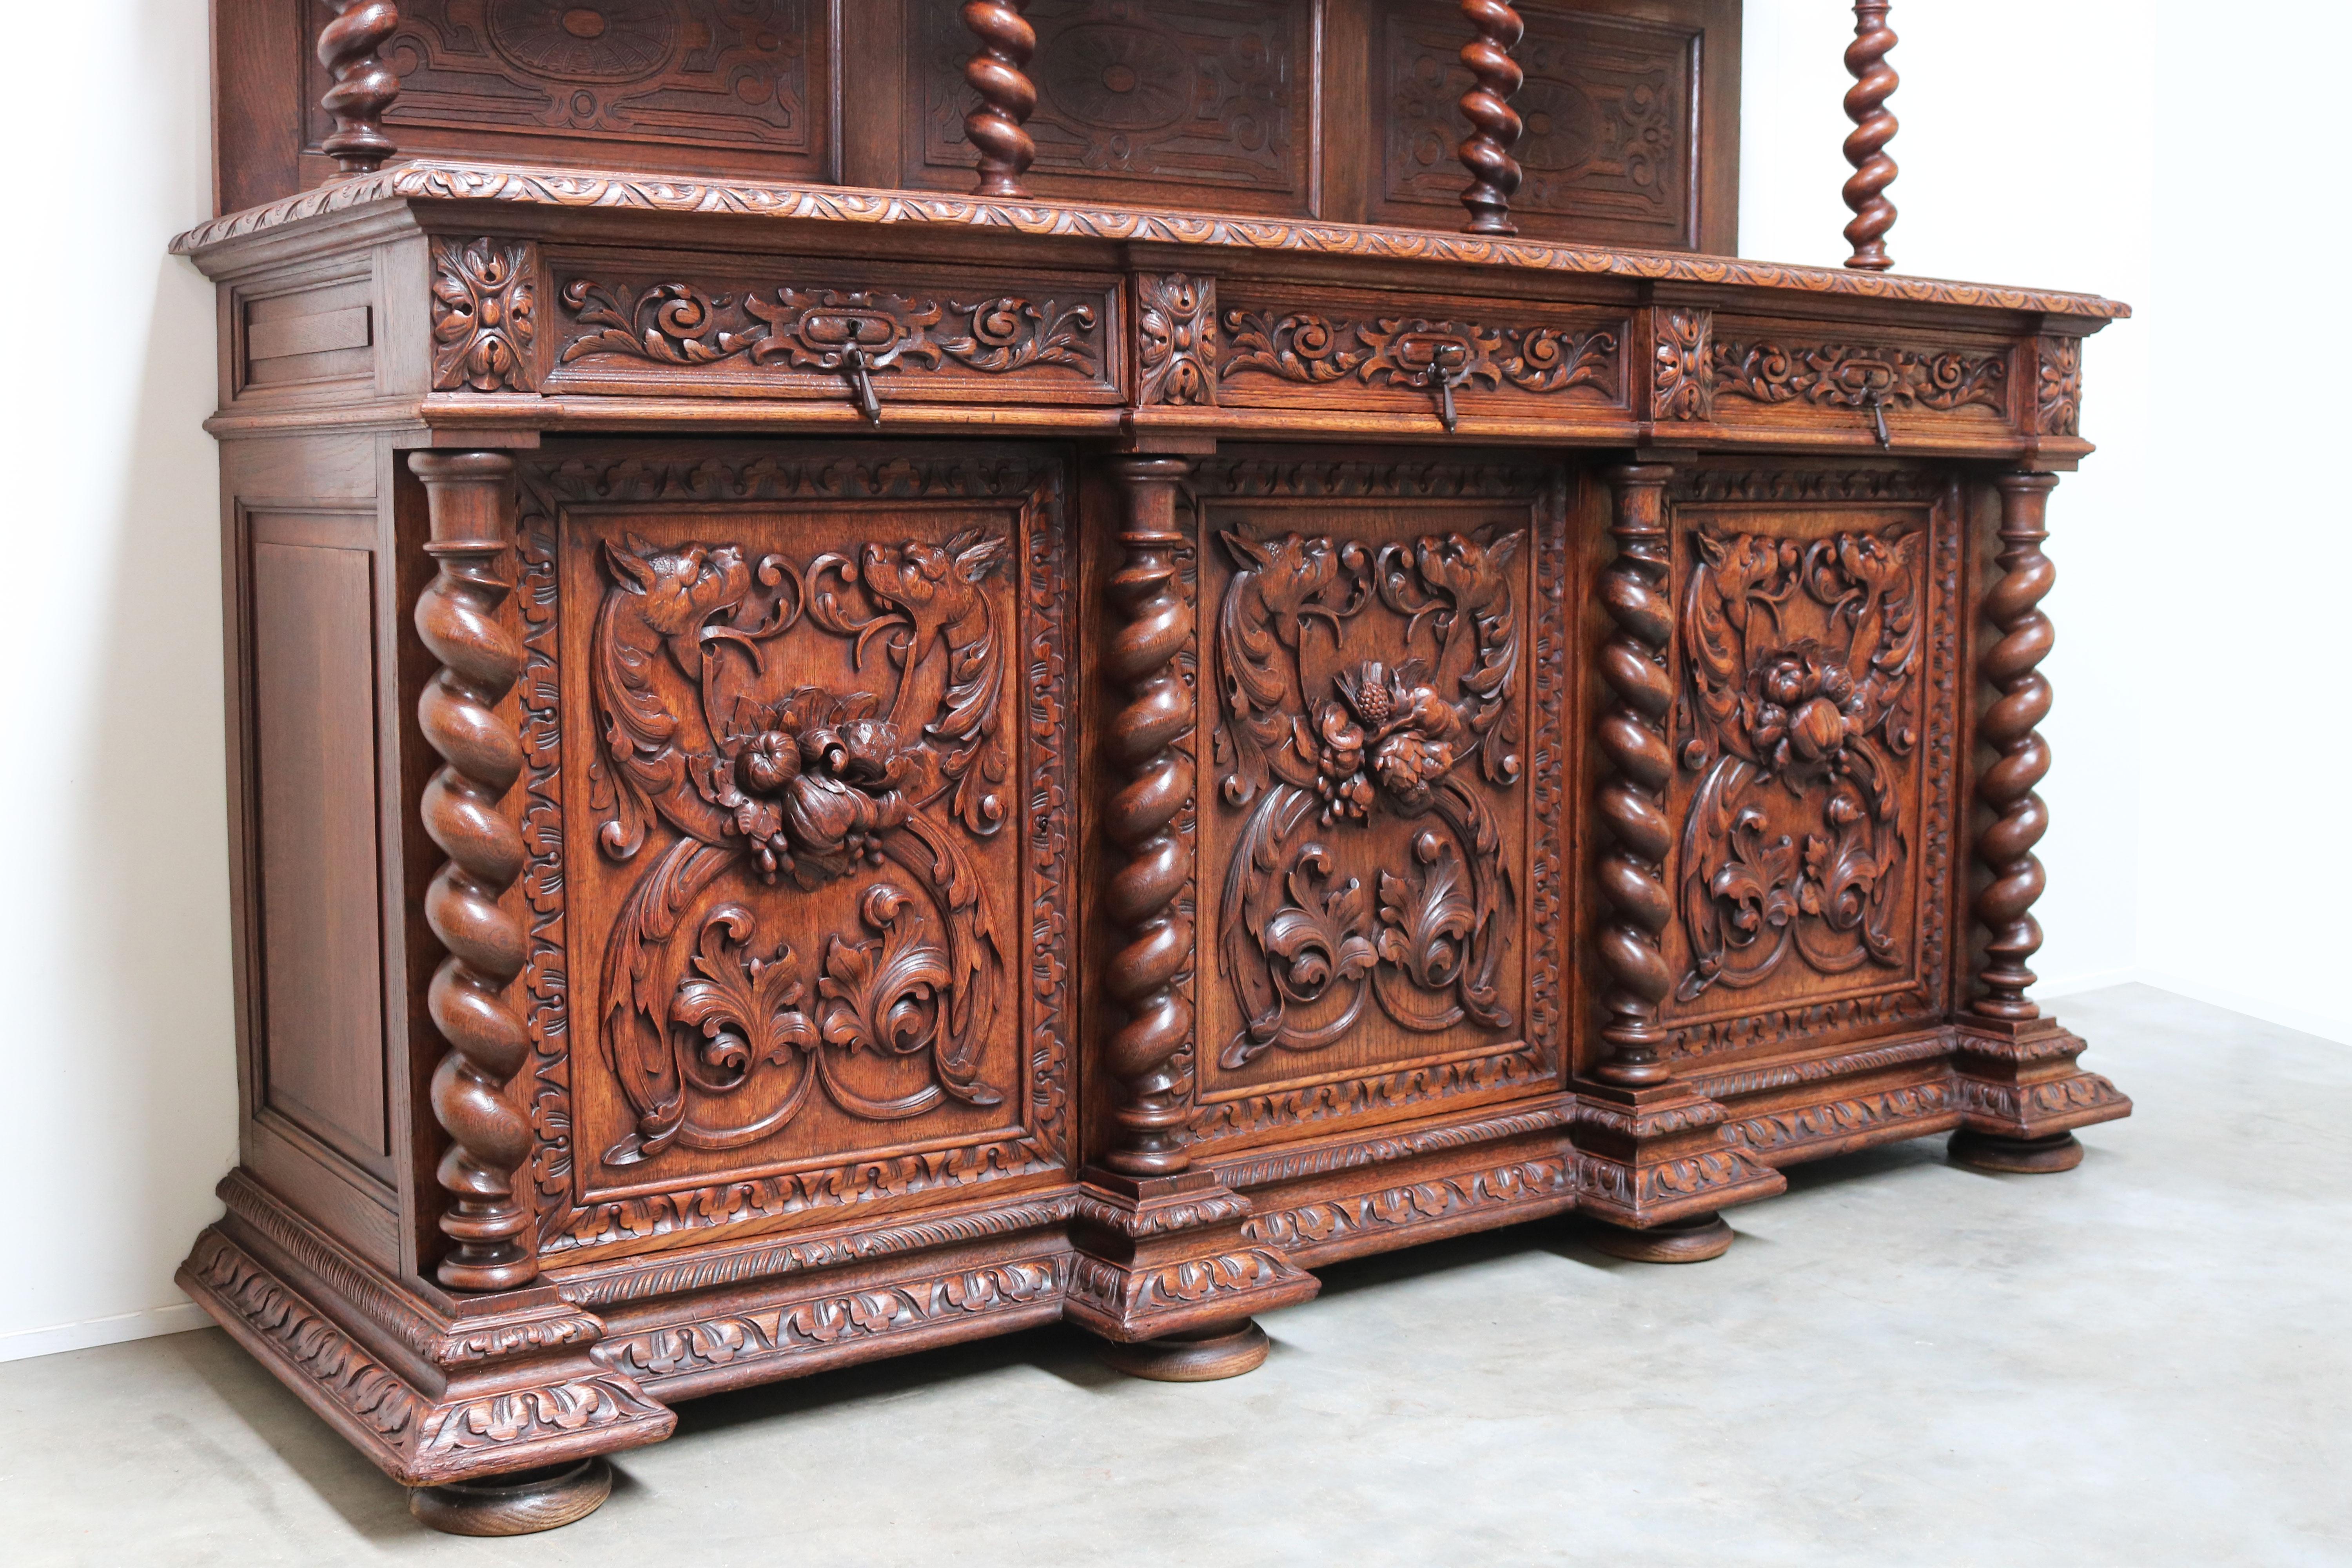 One of the most impressive sideboards we ever had the pleasure of selling in our store. 
This marvelous French Renaissance revival sideboard with a stunning amount of 12 barley twisted pillars. 
Impressively carved doorpanels with 6 dragons in